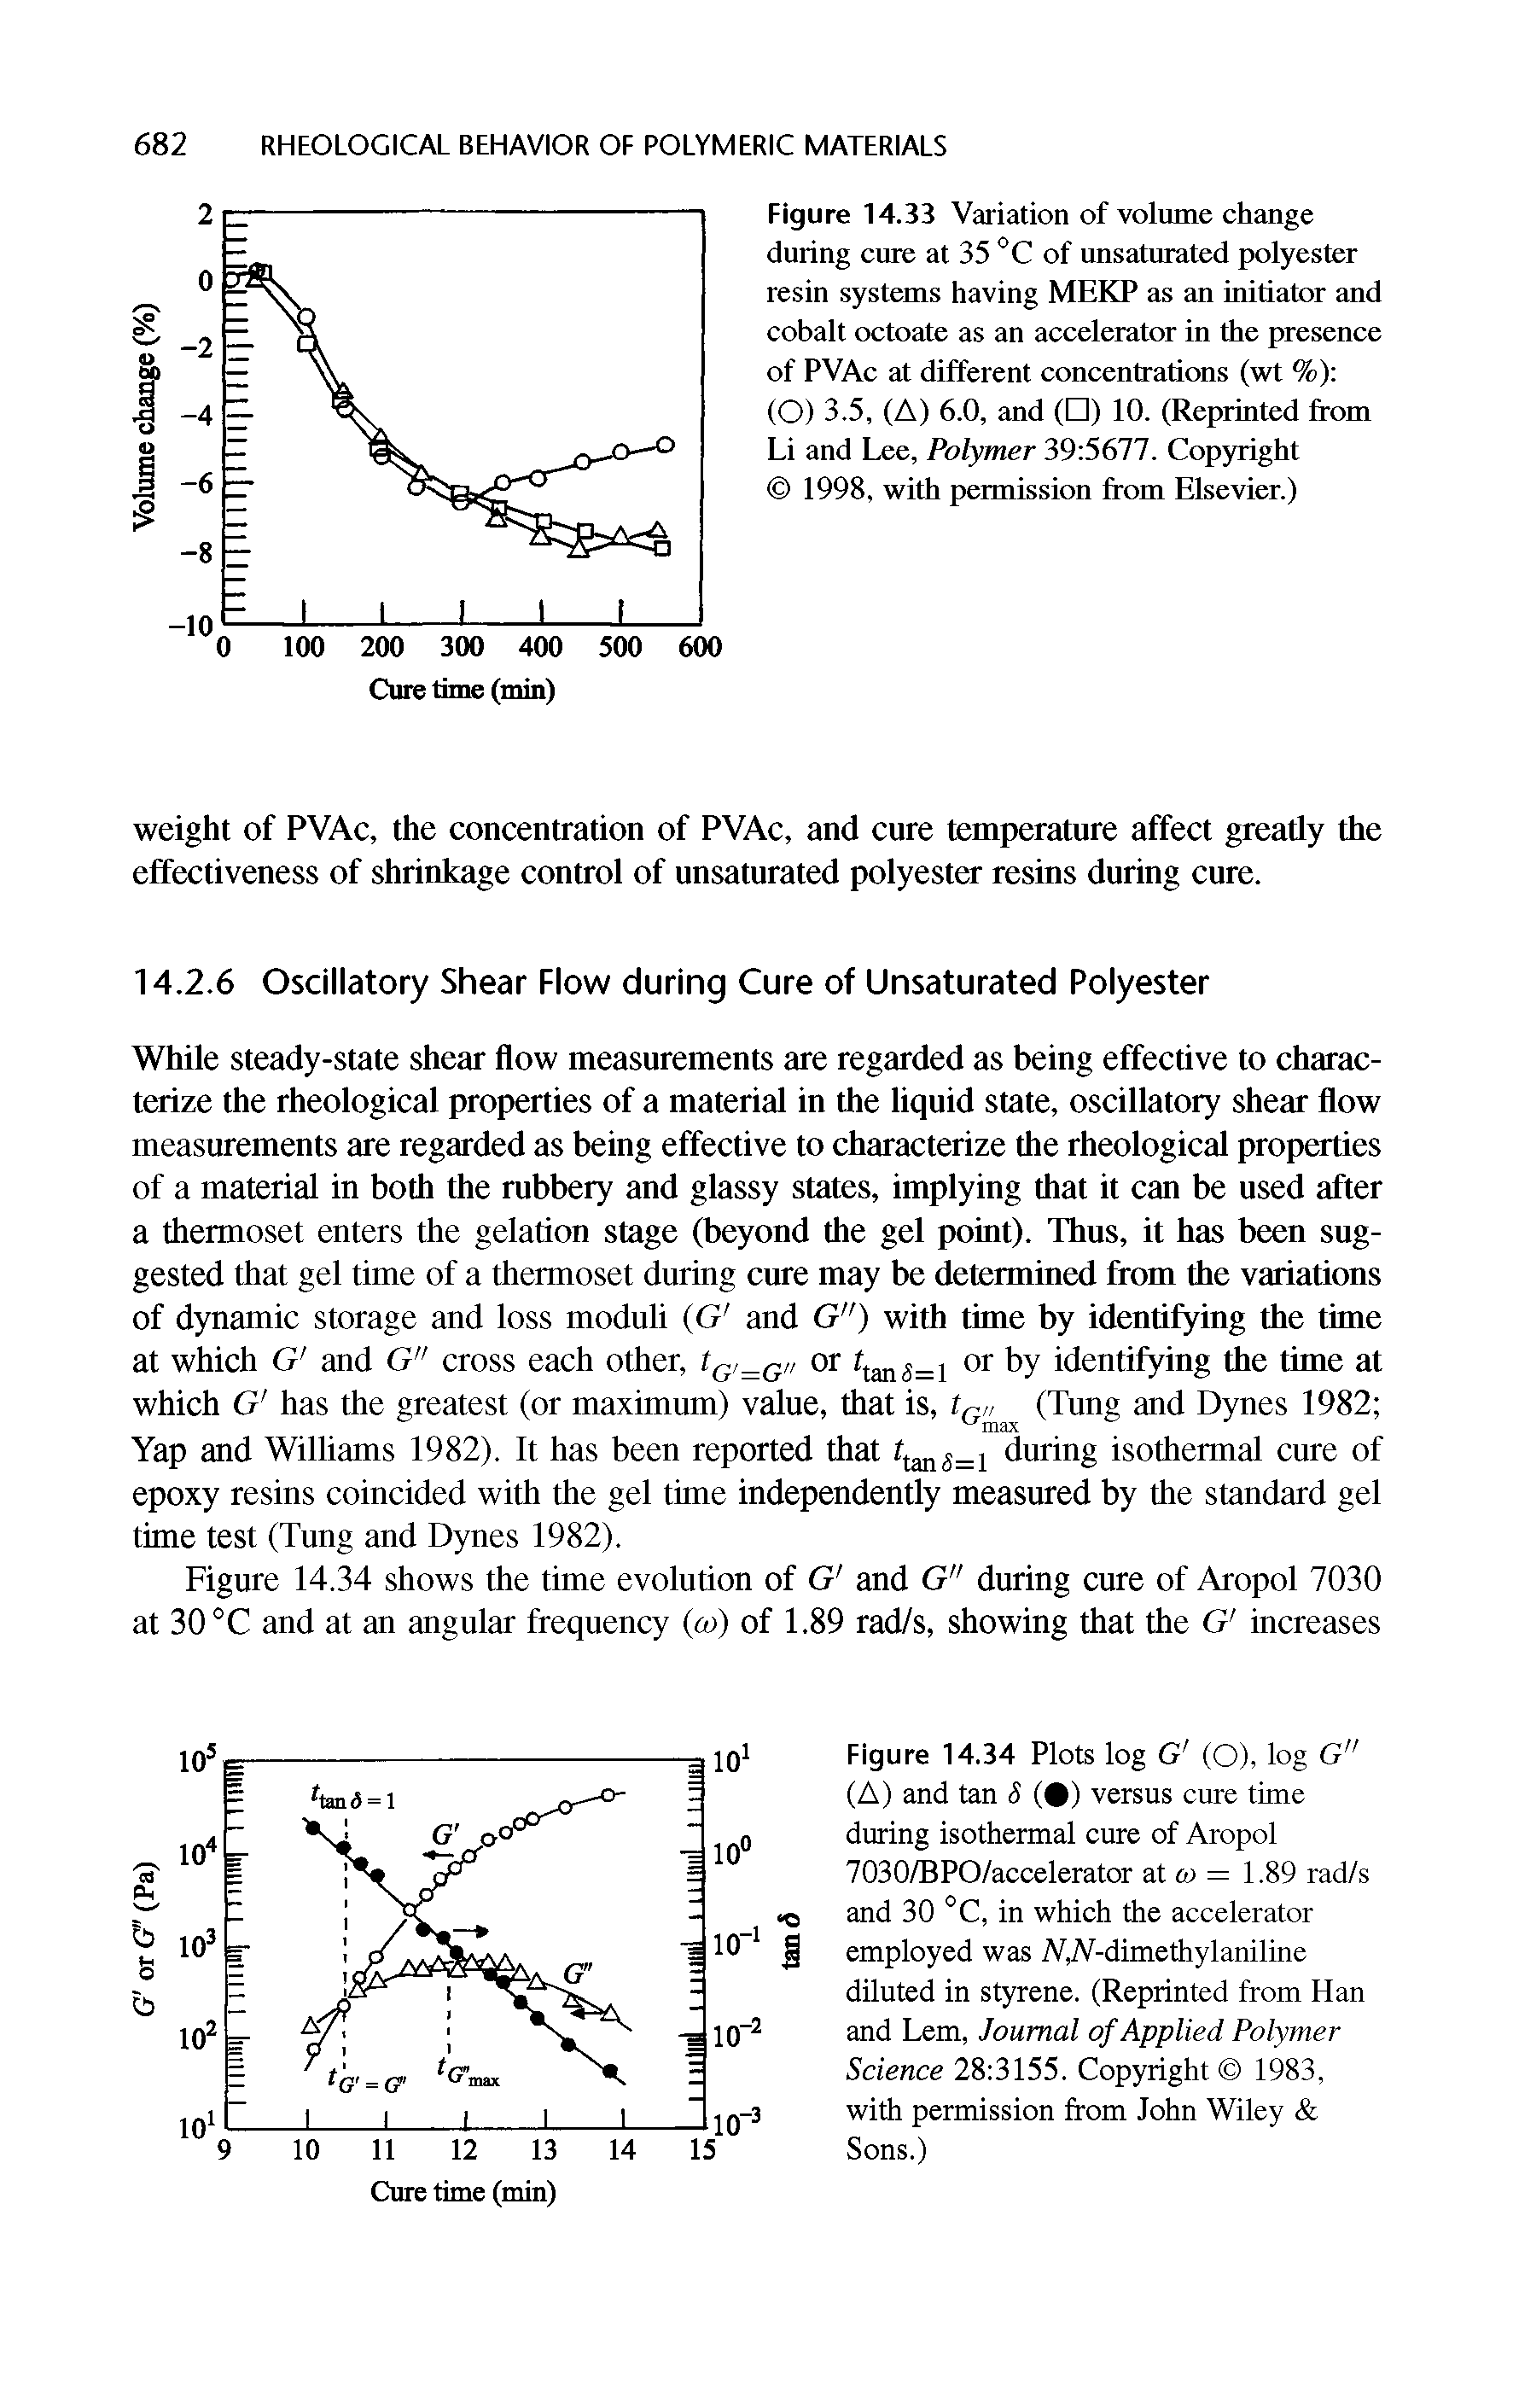 Figure 14.33 Variation of volume change during cure at 35 °C of unsaturated polyester resin systems having MEKP as an initiator and cobalt octoate as an accelerator in the presence of PVAc at different concentrations (wt %) (O) 3.5, (A) 6.0, and ( ) 10. (Reprinted from Li and Lee, Polymer 39 5677. Copyright 1998, with permission from Elsevier.)...